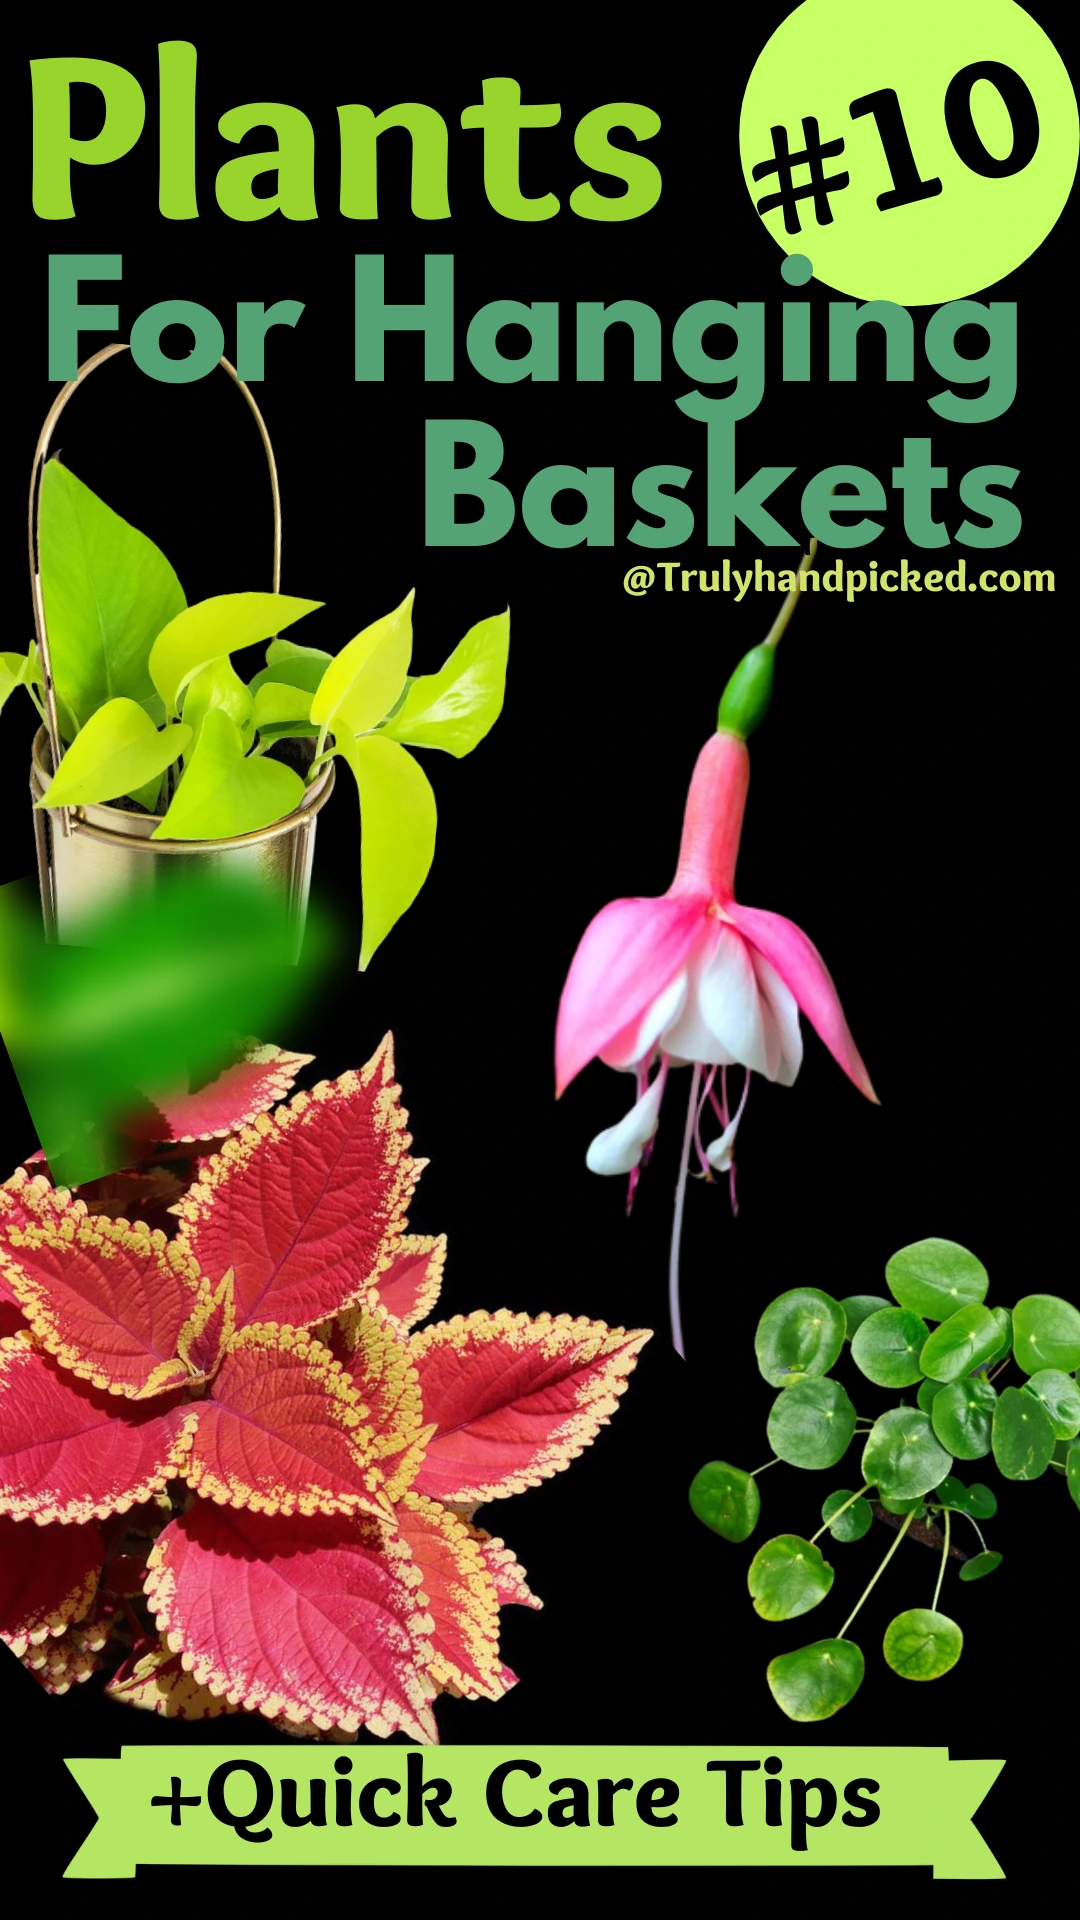 Plants that suit for hanging pots list of 10 best plants with pictures